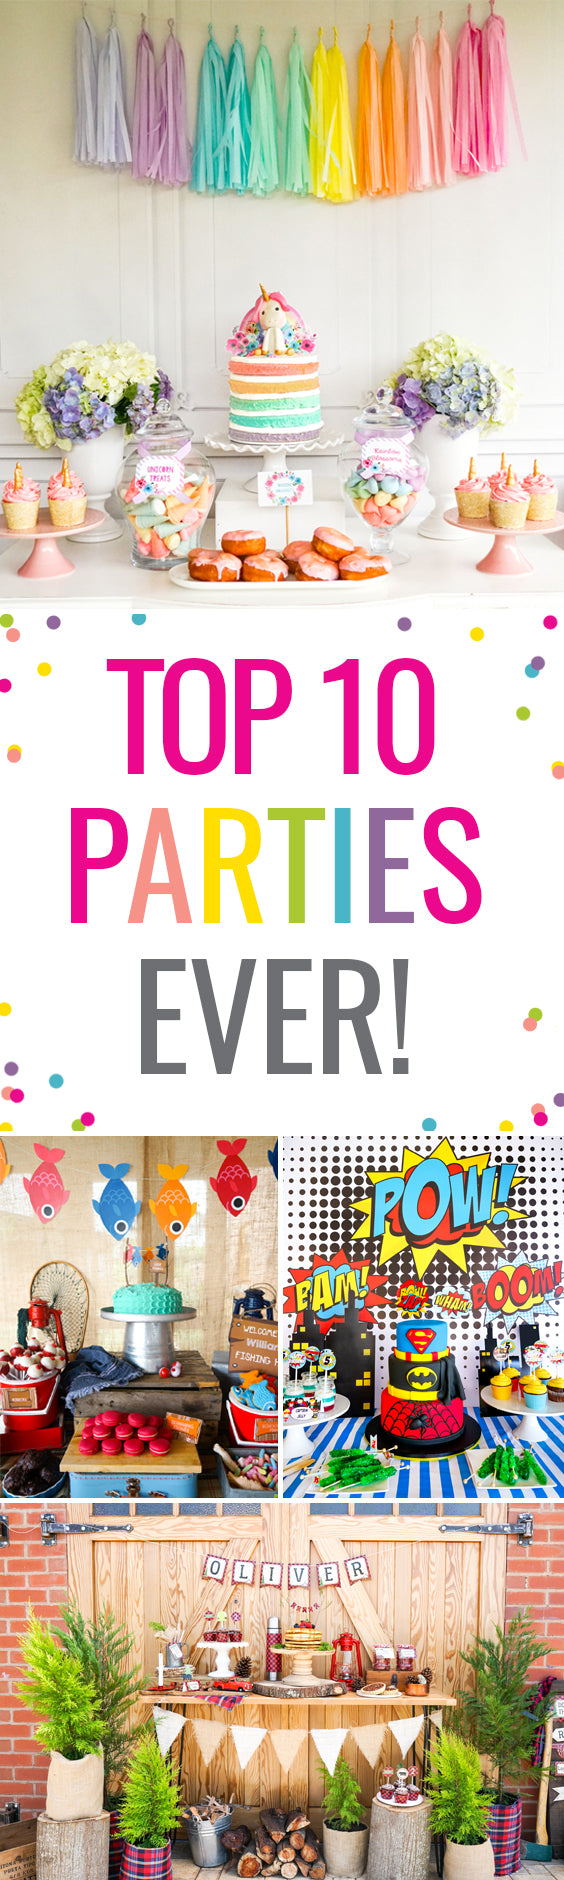 The Best Kid's party themes and decorations ever!